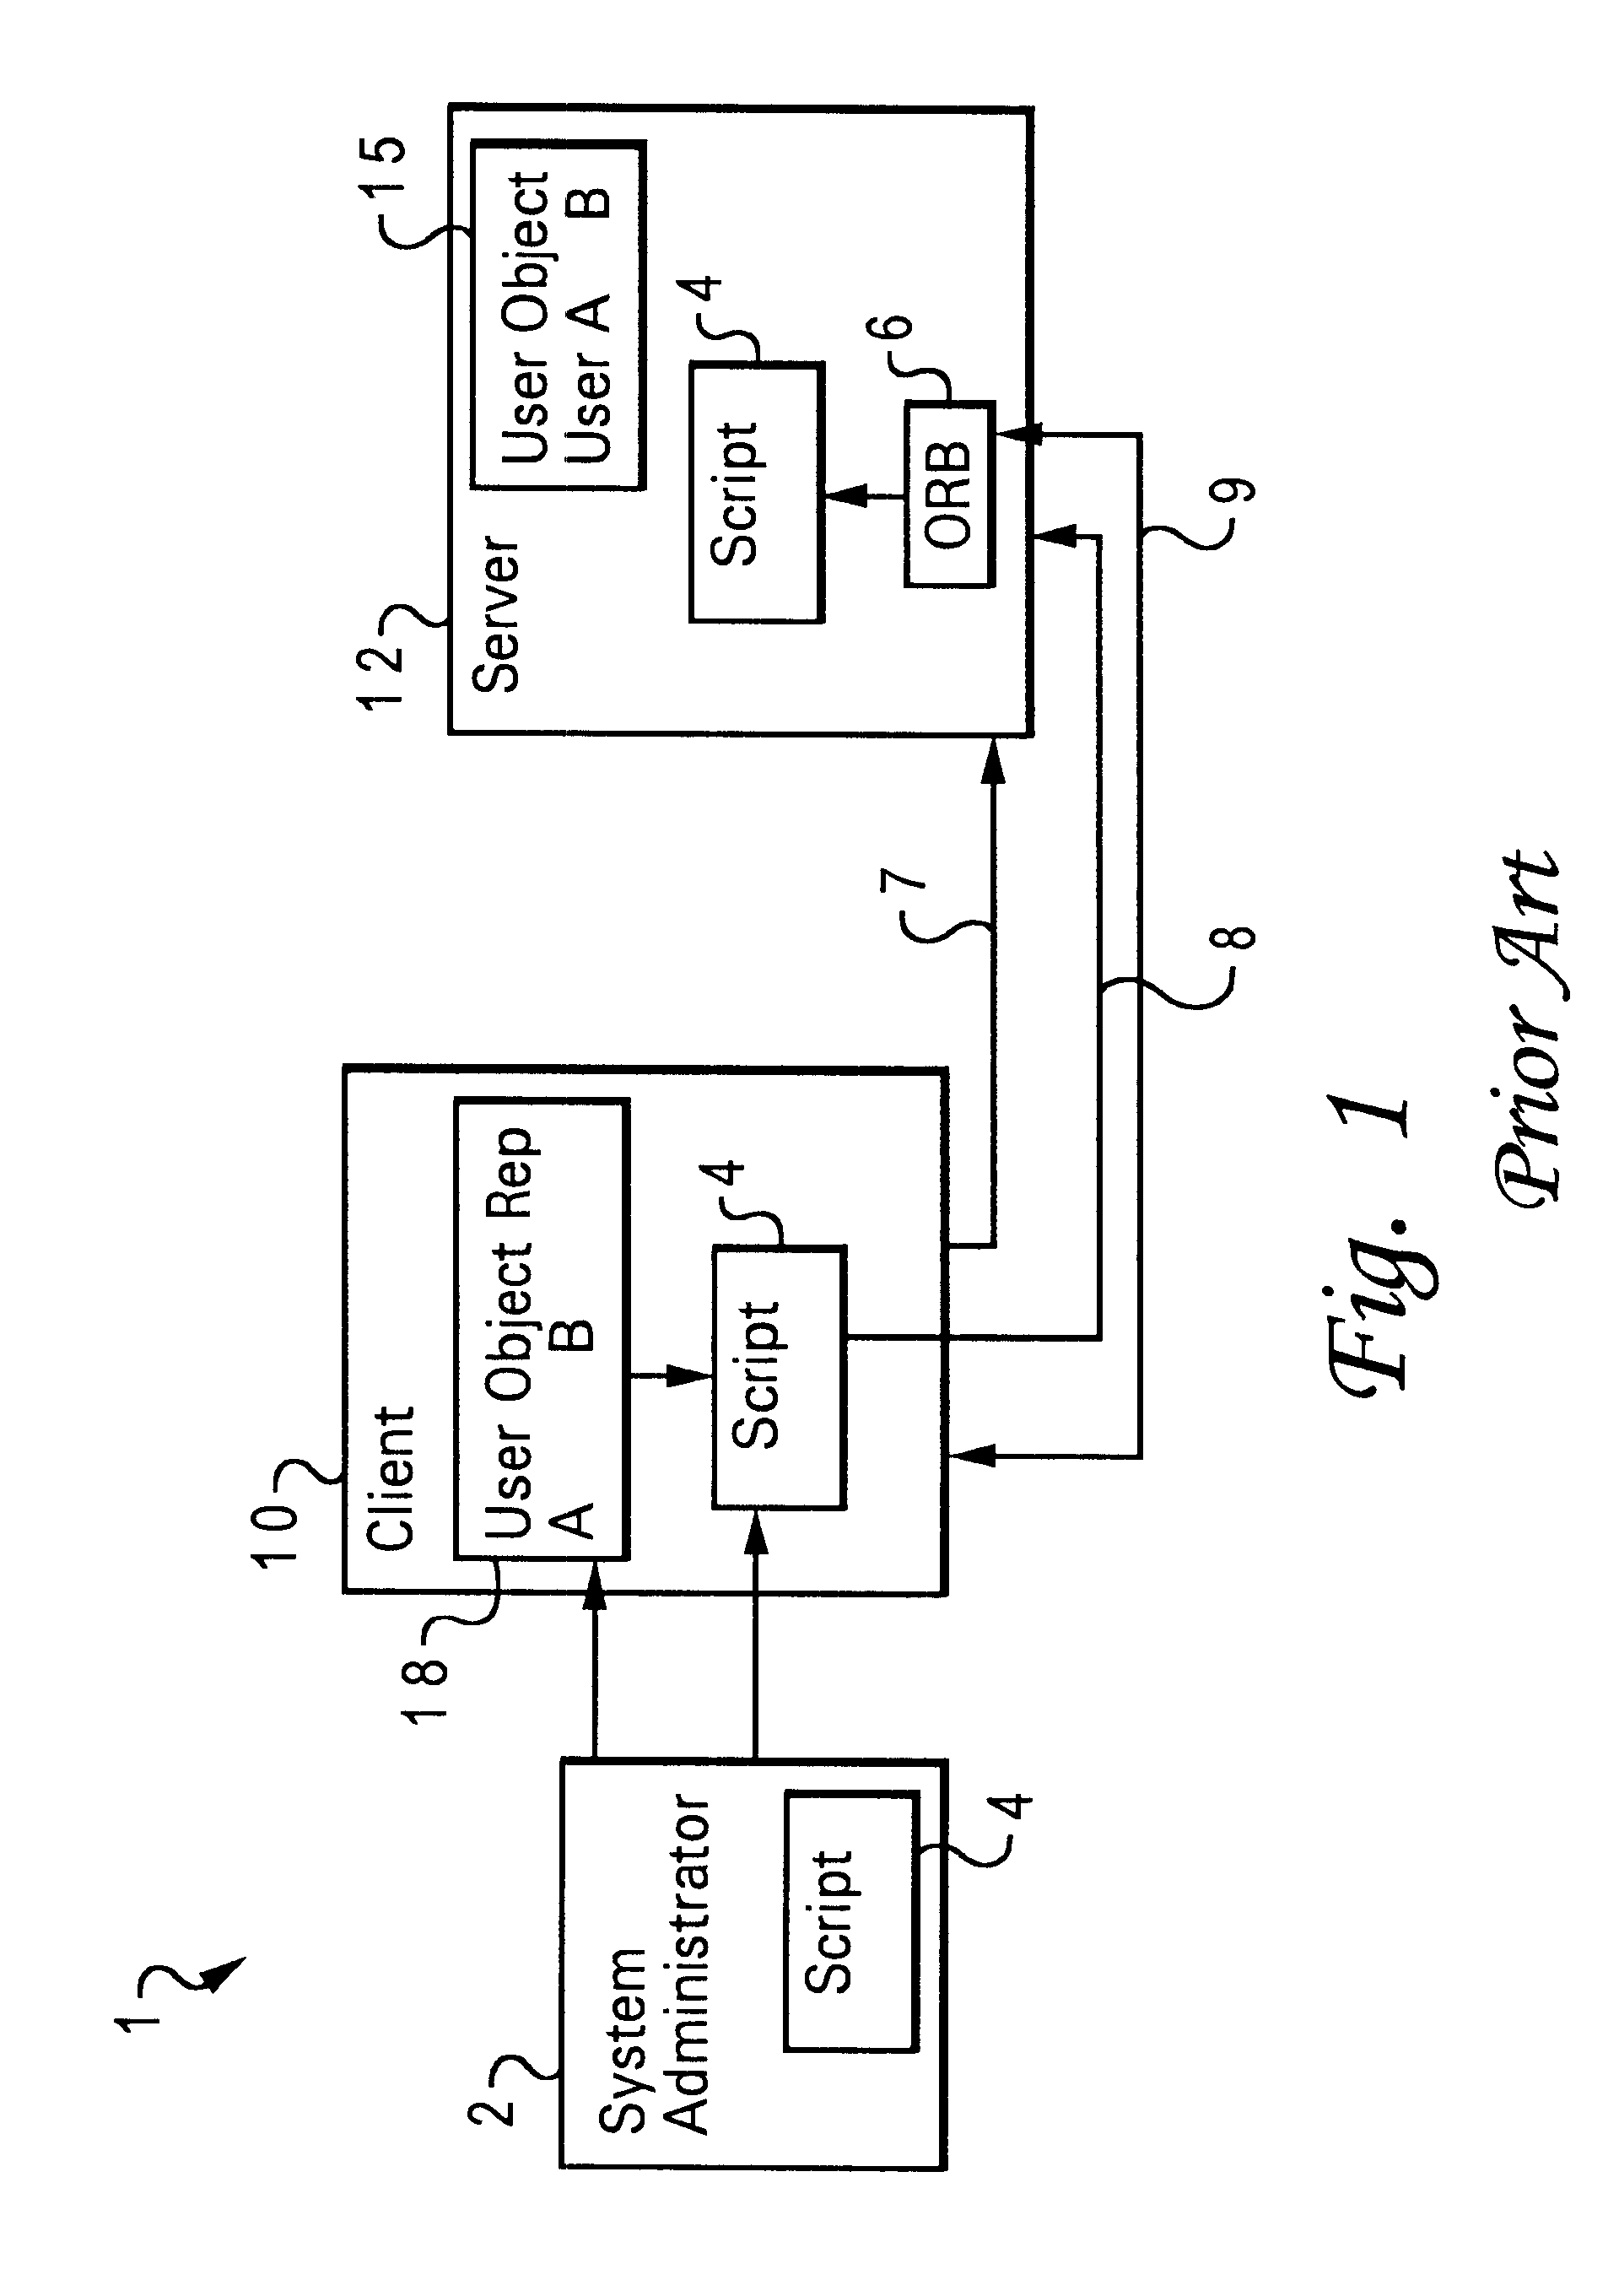 Method, system, and program for parameter expansion, generation, and execution of scripts in a networked environment